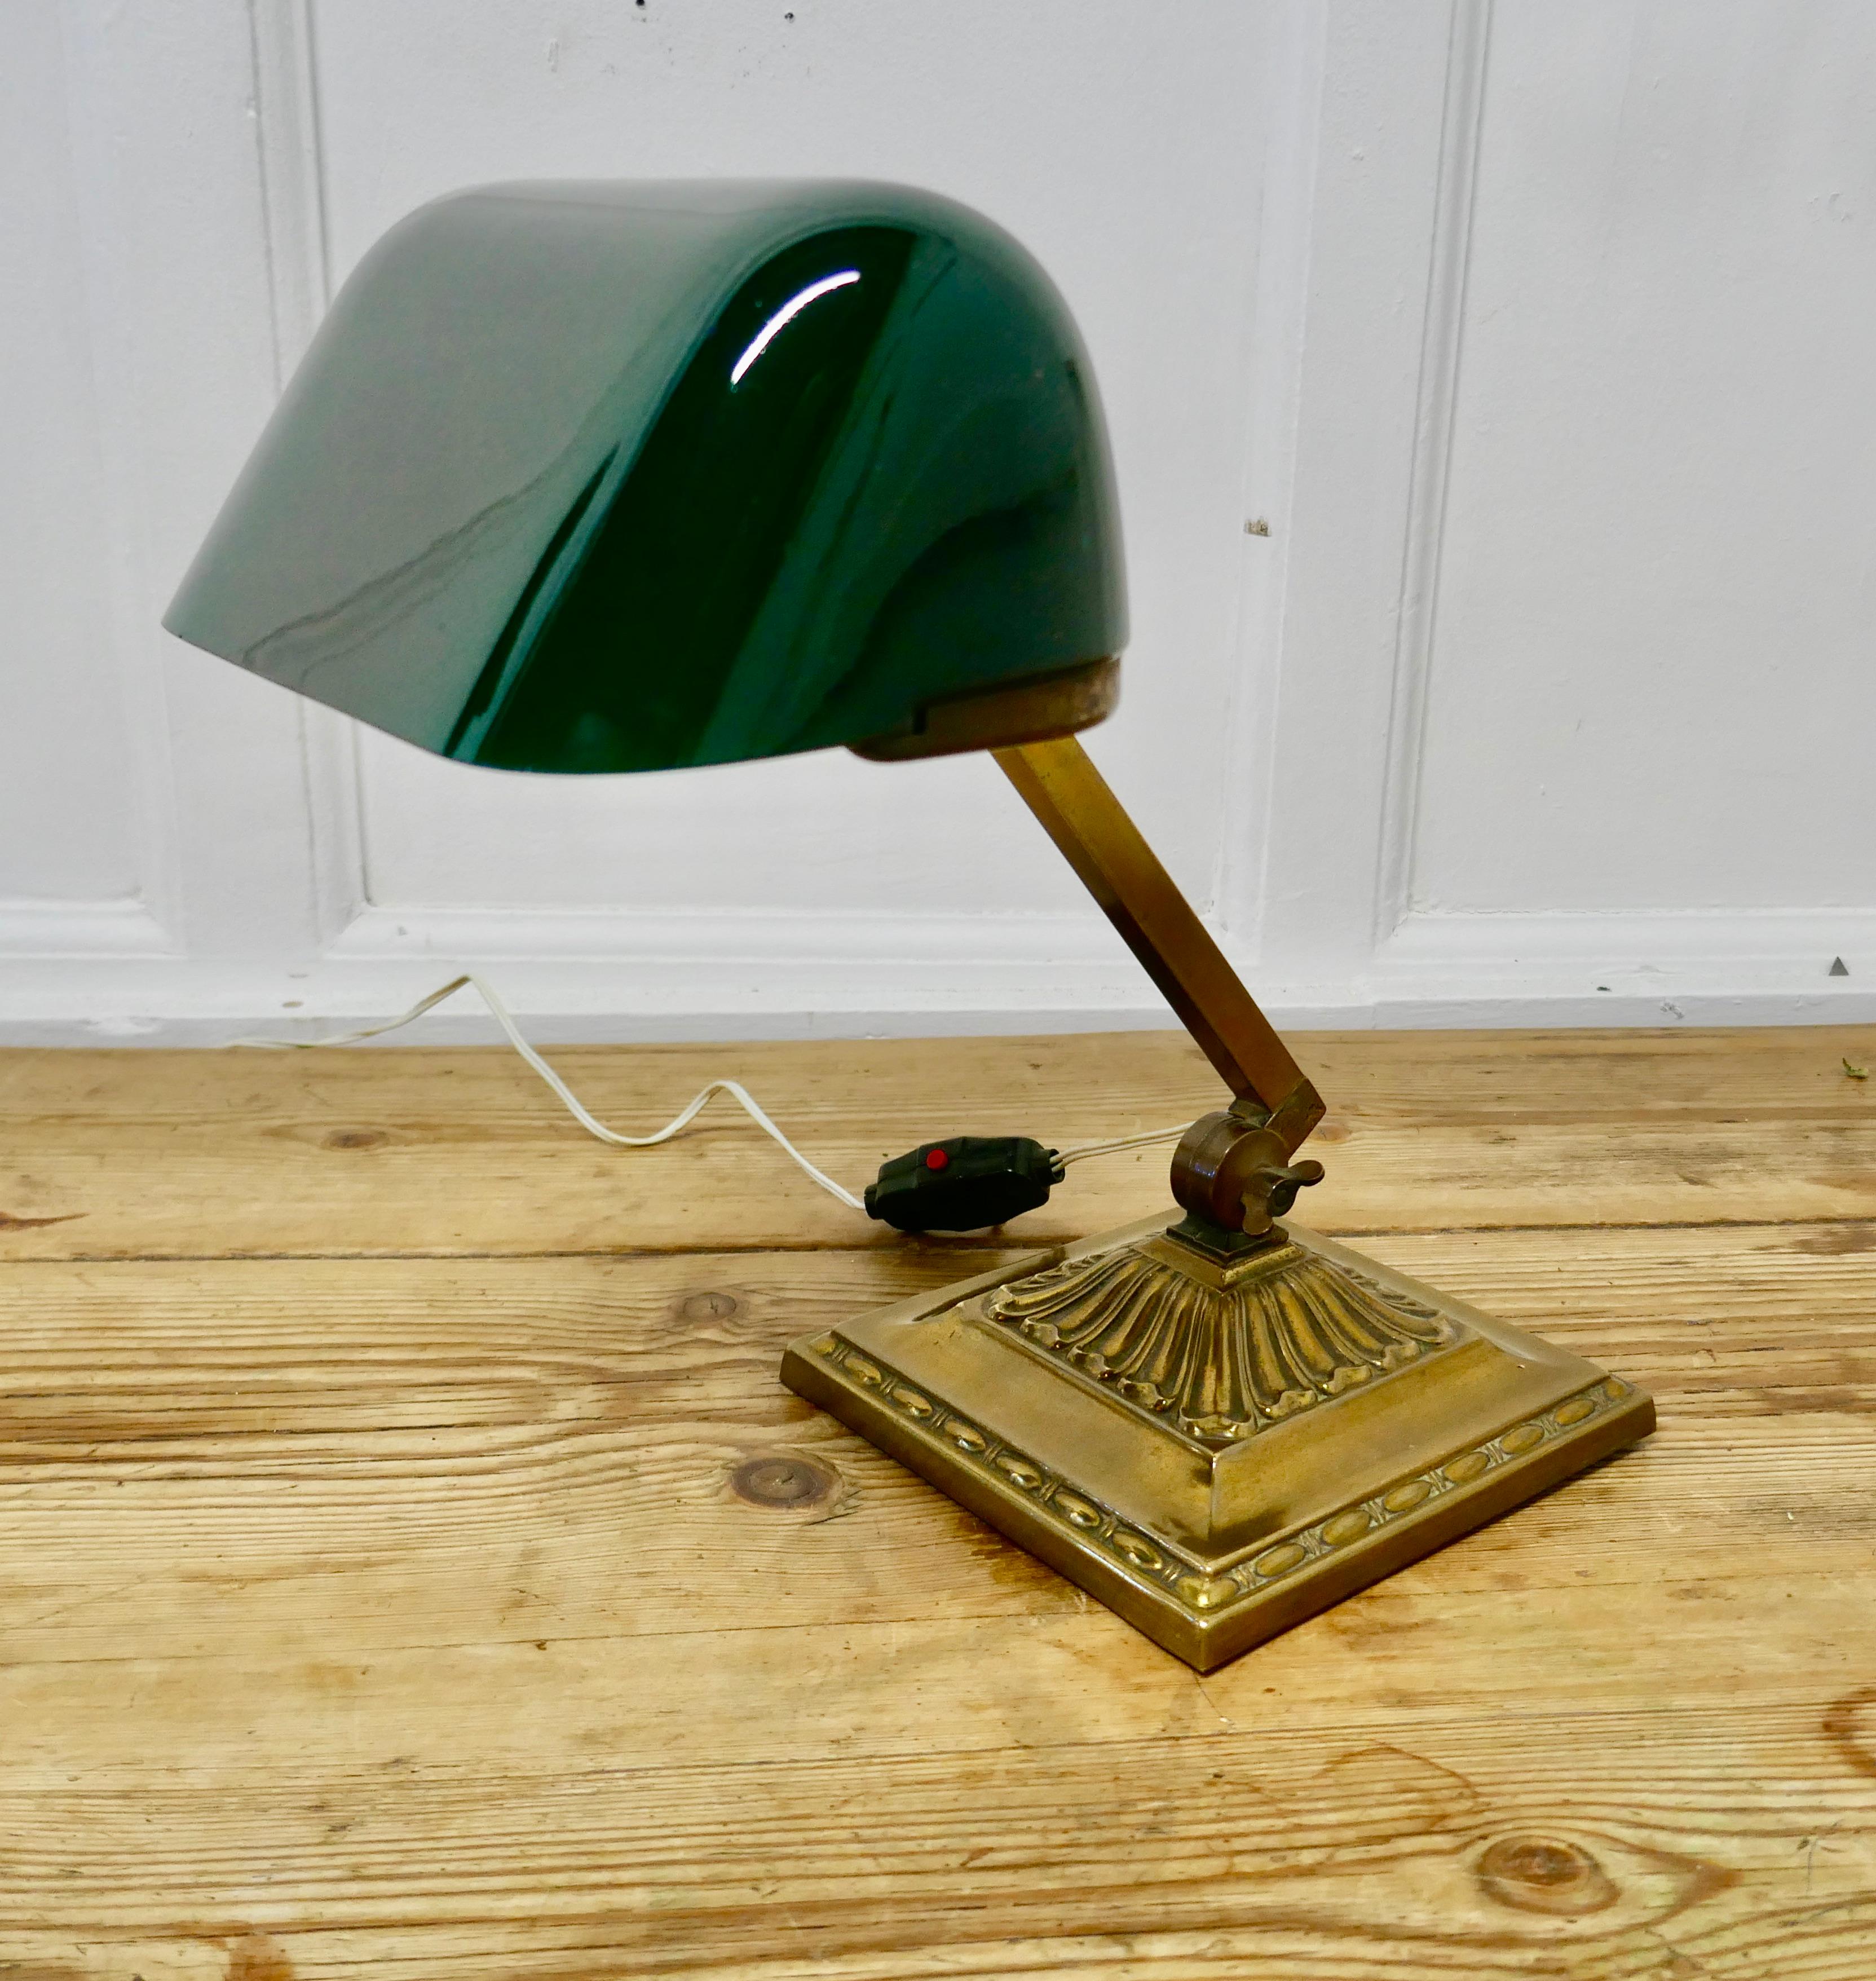 Early 20th century brass and green glass barrister’s desk lamp

A beautiful and seldom seen heavy quality fully adjustable early vintage barrister’s brass desk lamp, with its original green glass lampshade with has a white reflective underside and